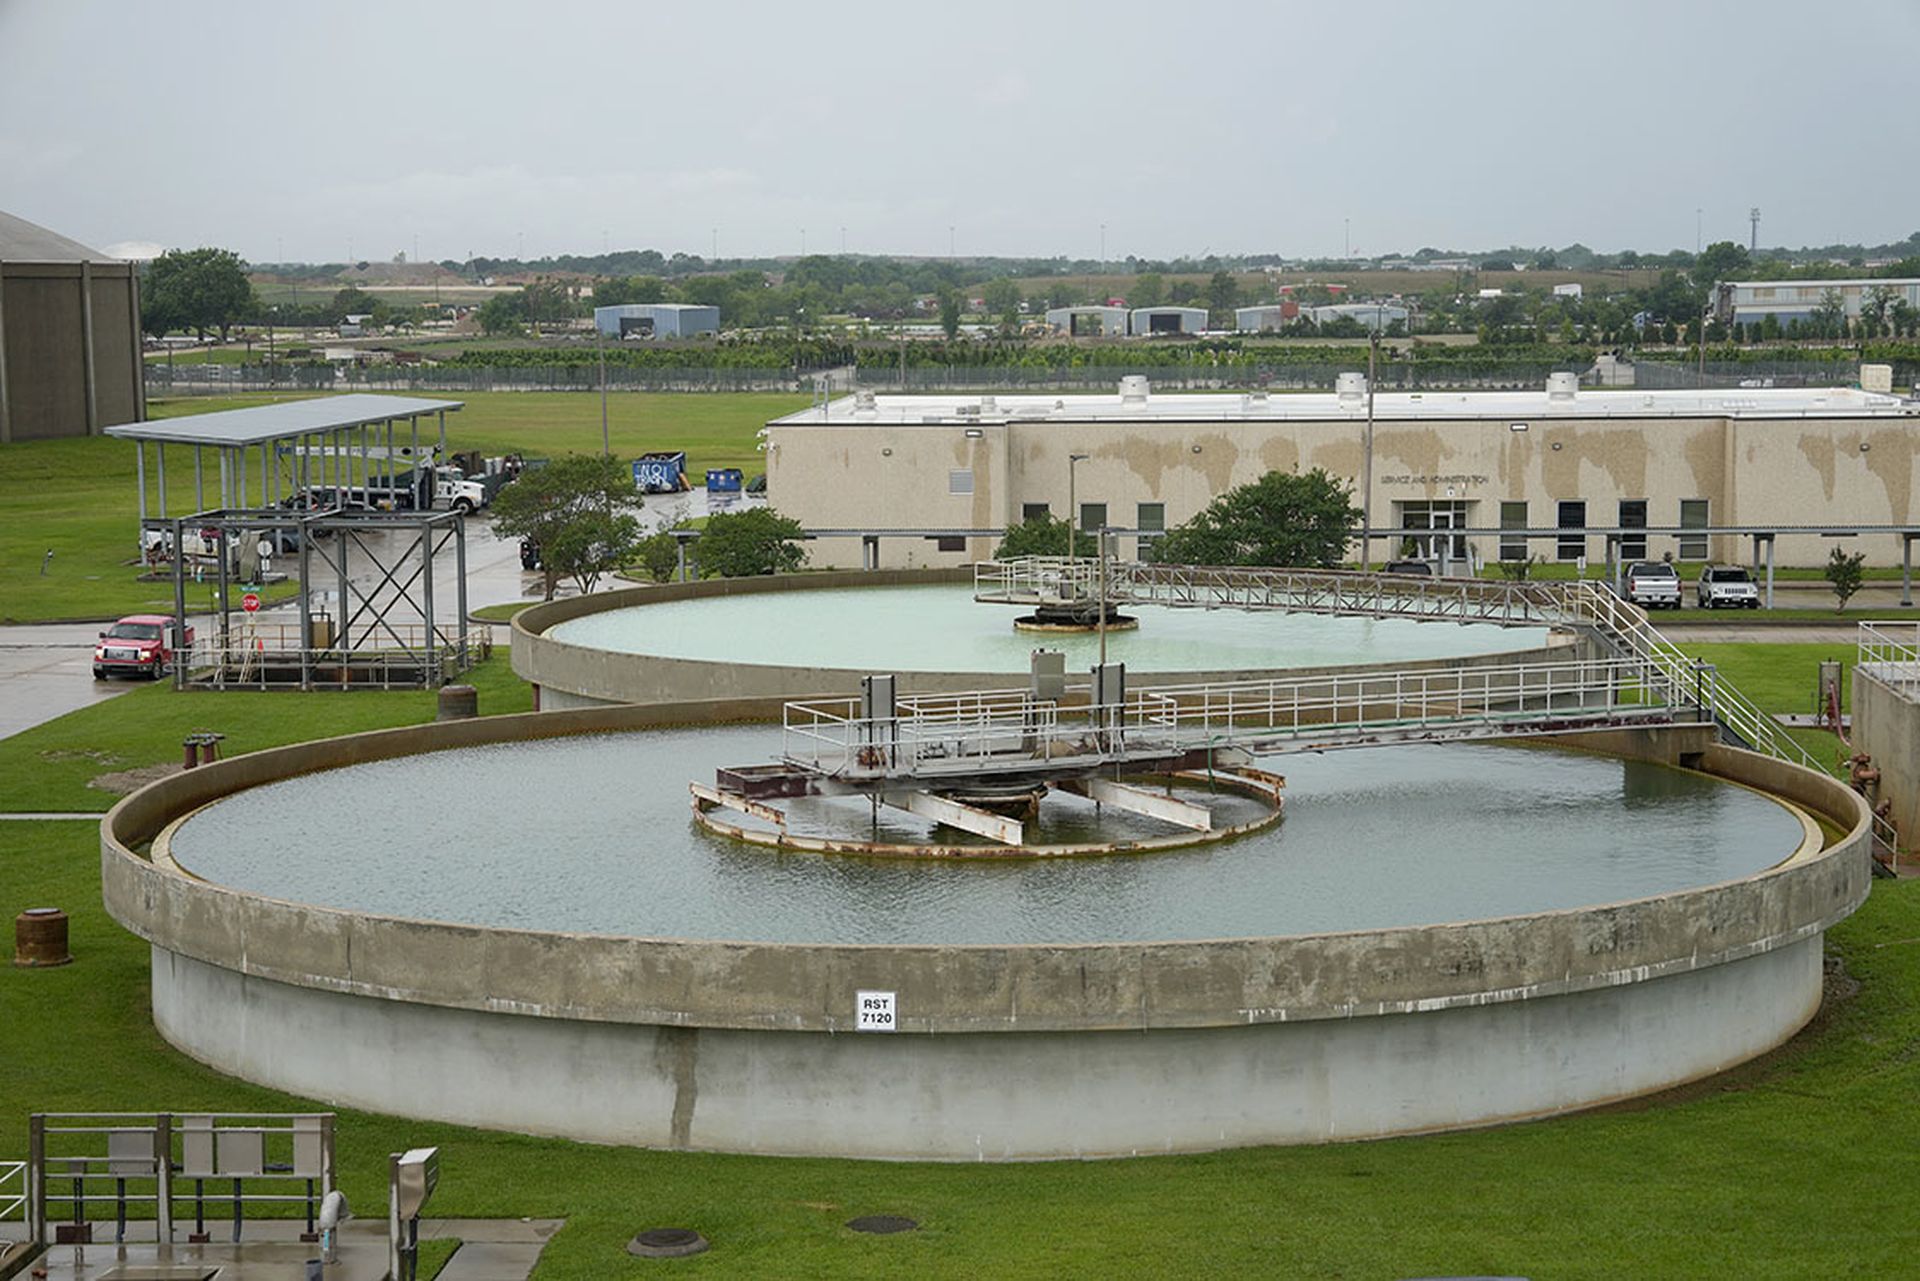 Circular clarifiers at the Southeast Water Purification Plant are shown